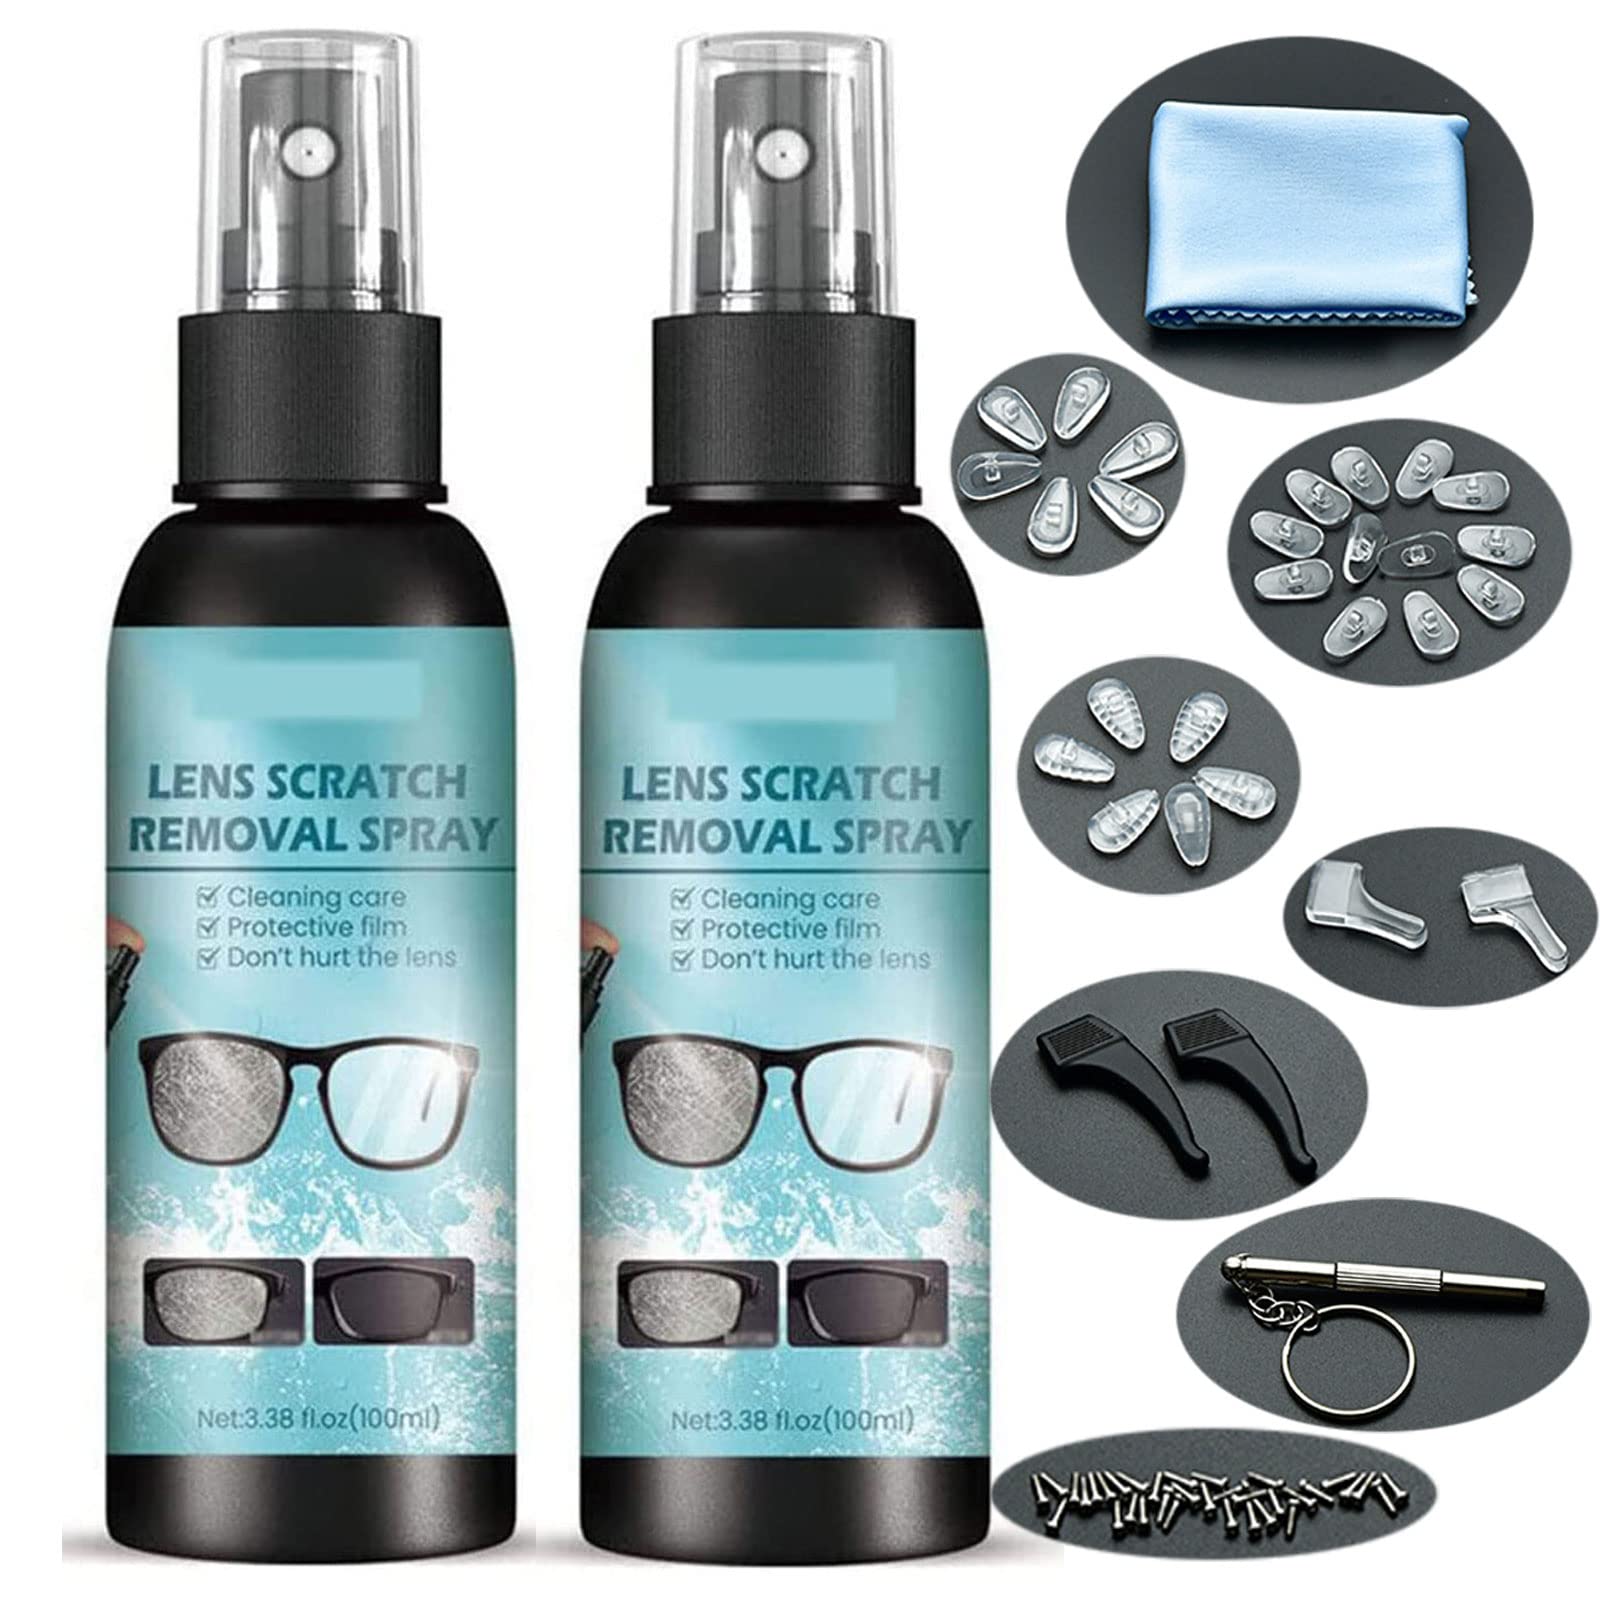  New Lens Scratch Removal Spray, Eyeglass Windshield Glass  Repair Liquid, Eyeglass Glass Scratch Repair Solution, Glasses Cleaner  Spray for Sunglasses Screen Cleaner Tools (5pc) : Health & Household